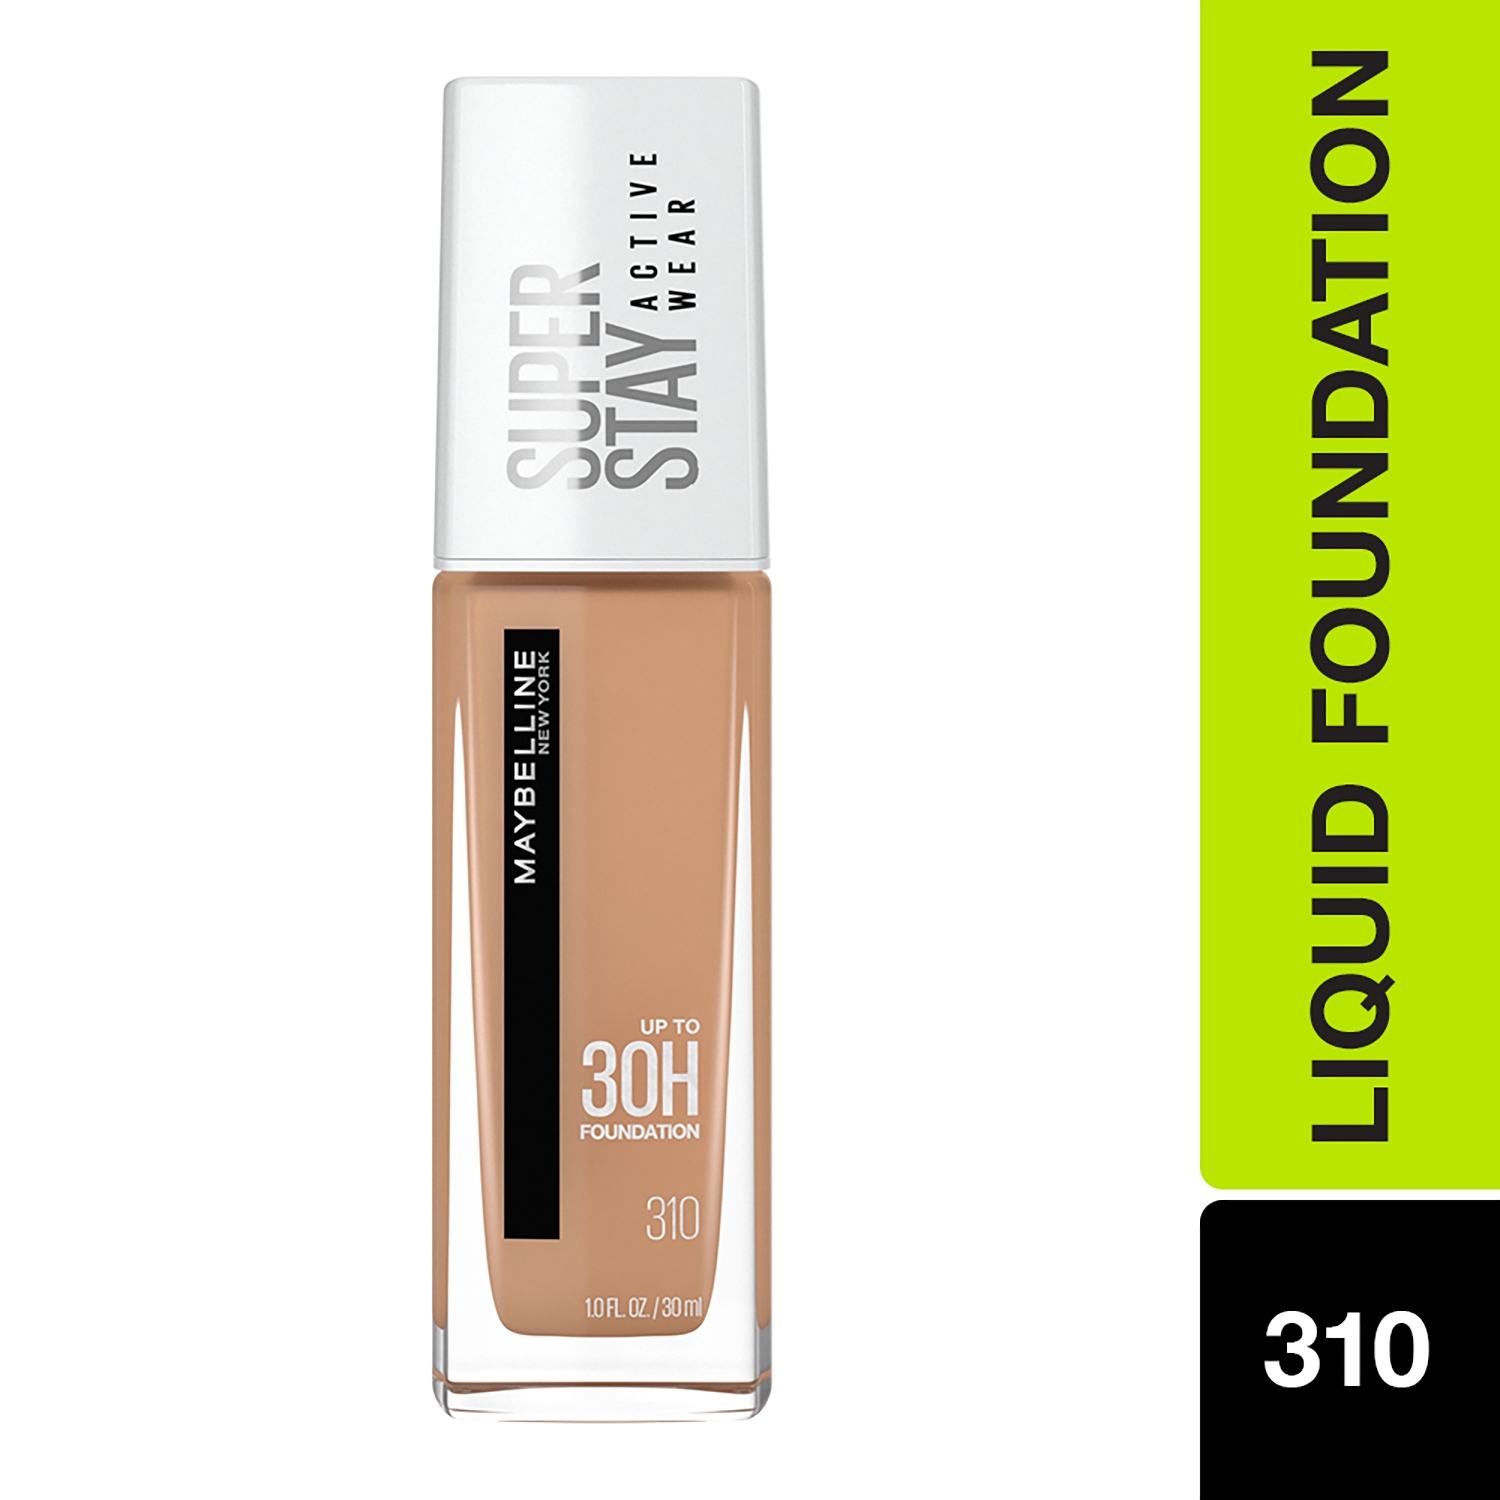 Stay - Super (30ml) Maybelline Foundation Coverage Liquid Ivory 24H 112 Full York Natural New